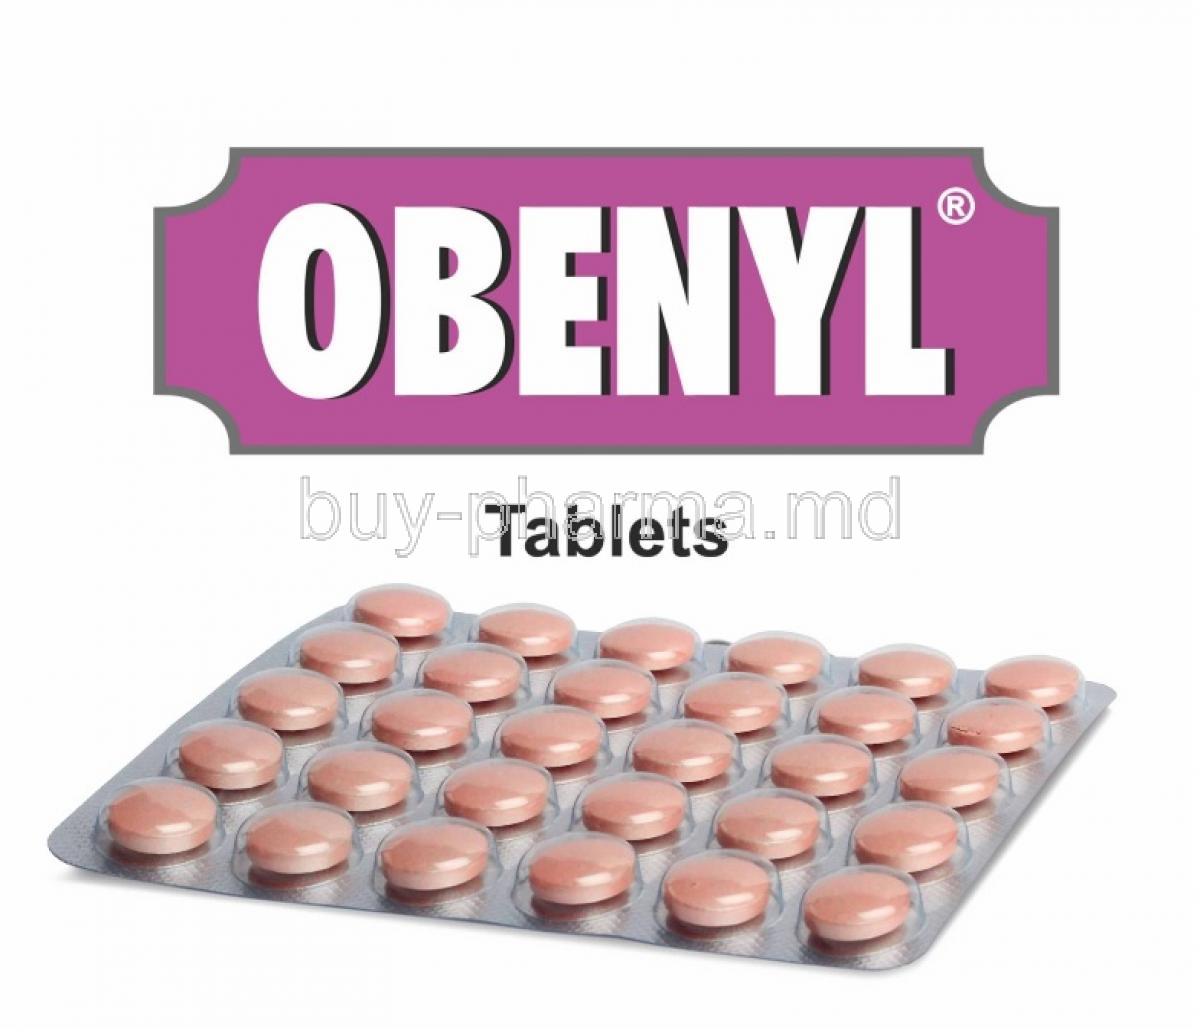 Obenyl box and tablets